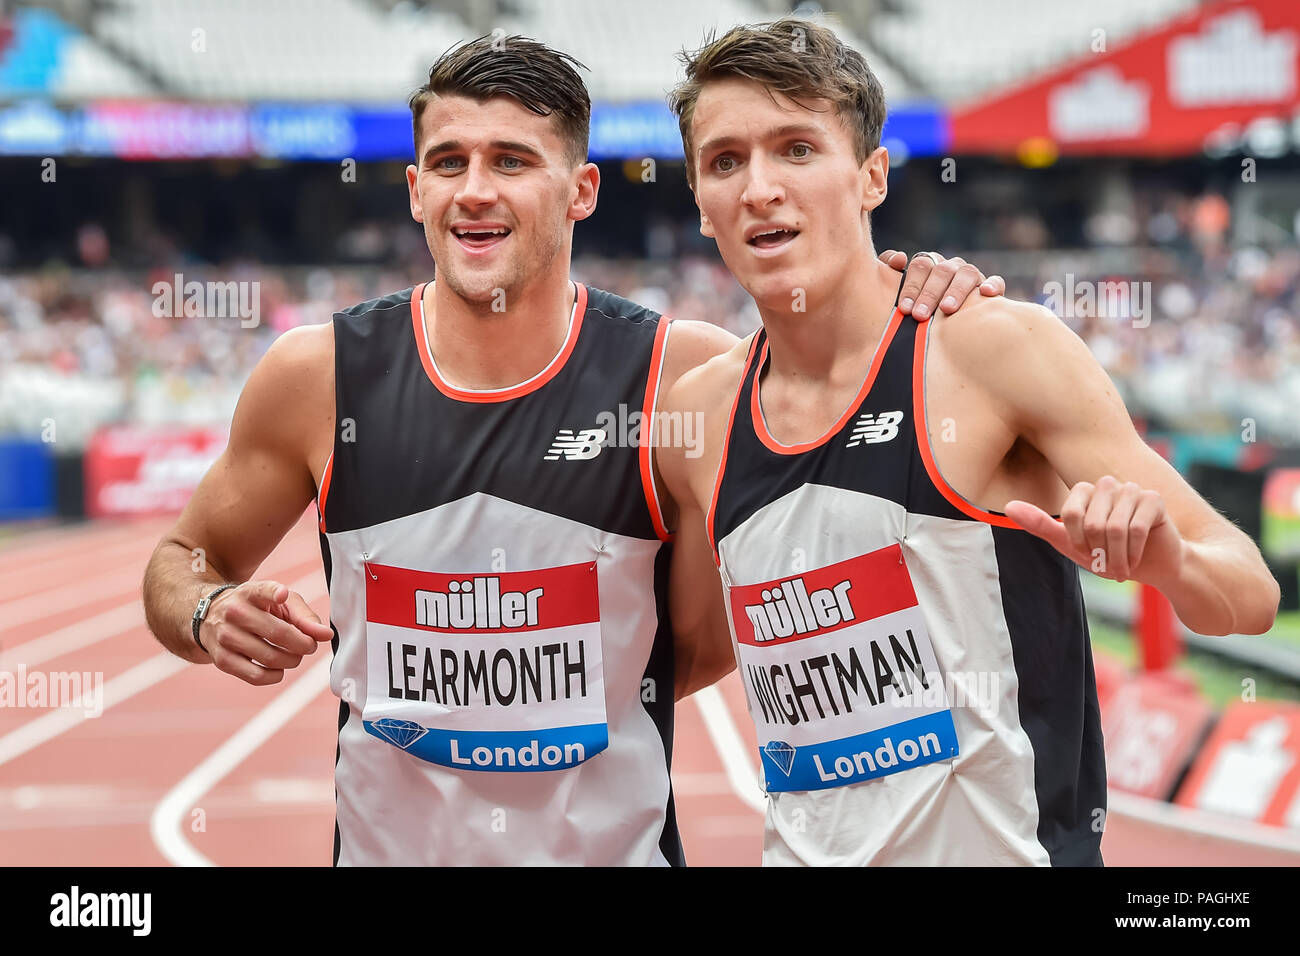 London, UK. 22nd July 2018. Guy Learmonth and Jake Wightman (GBR) after Men's 800m during 2018 IAAF Diamond League - Muller Anniversary Games at London Stadium on Sunday, 22 July 2018. LONDON, ENGLAND. Credit: Taka G Wu Credit: Taka Wu/Alamy Live News Stock Photo